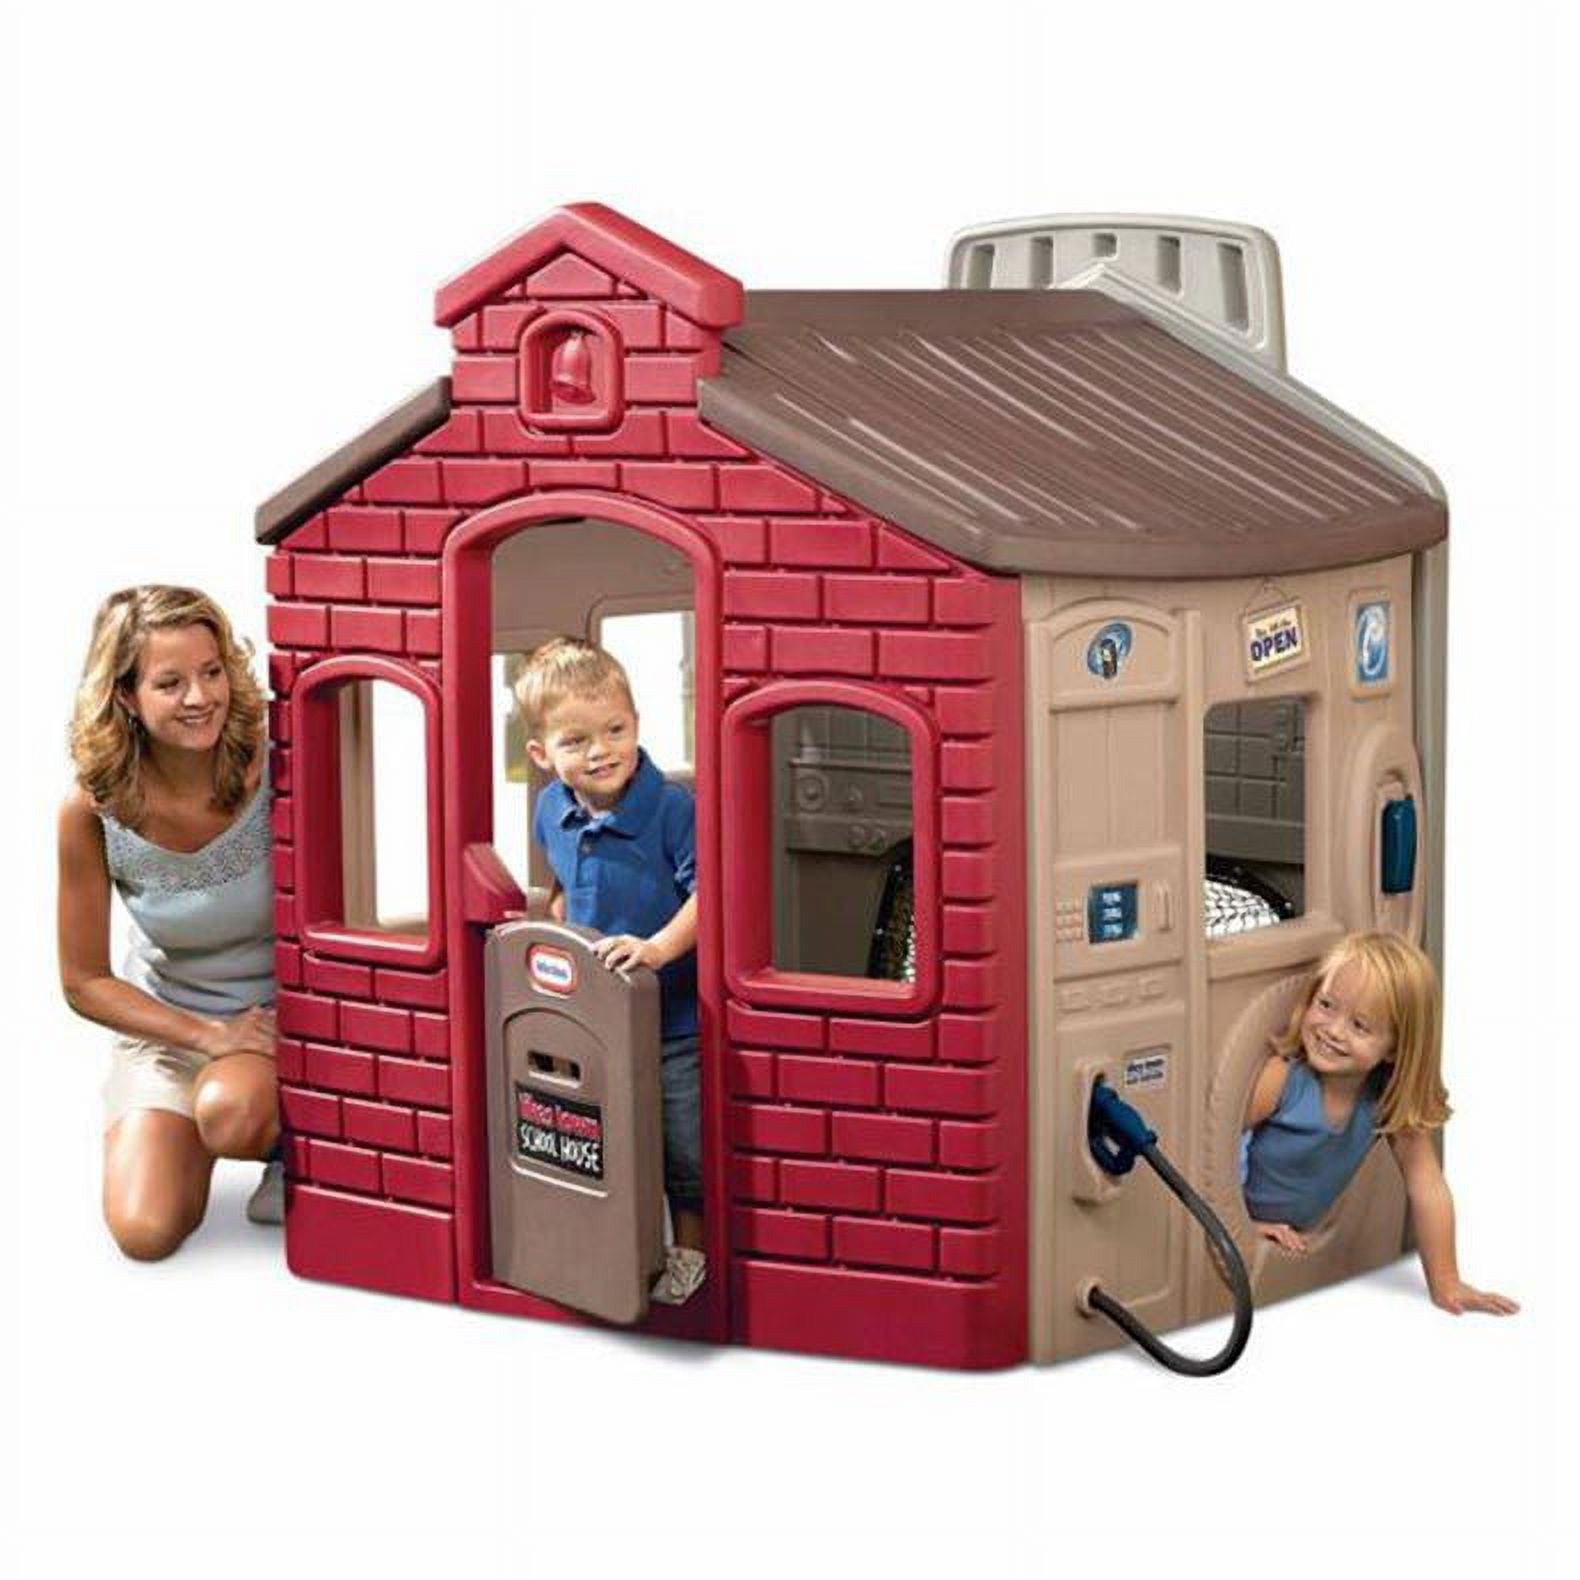 Little Tikes Town Playhouse, Features Market, Gas Station, and Sports Center - image 1 of 8